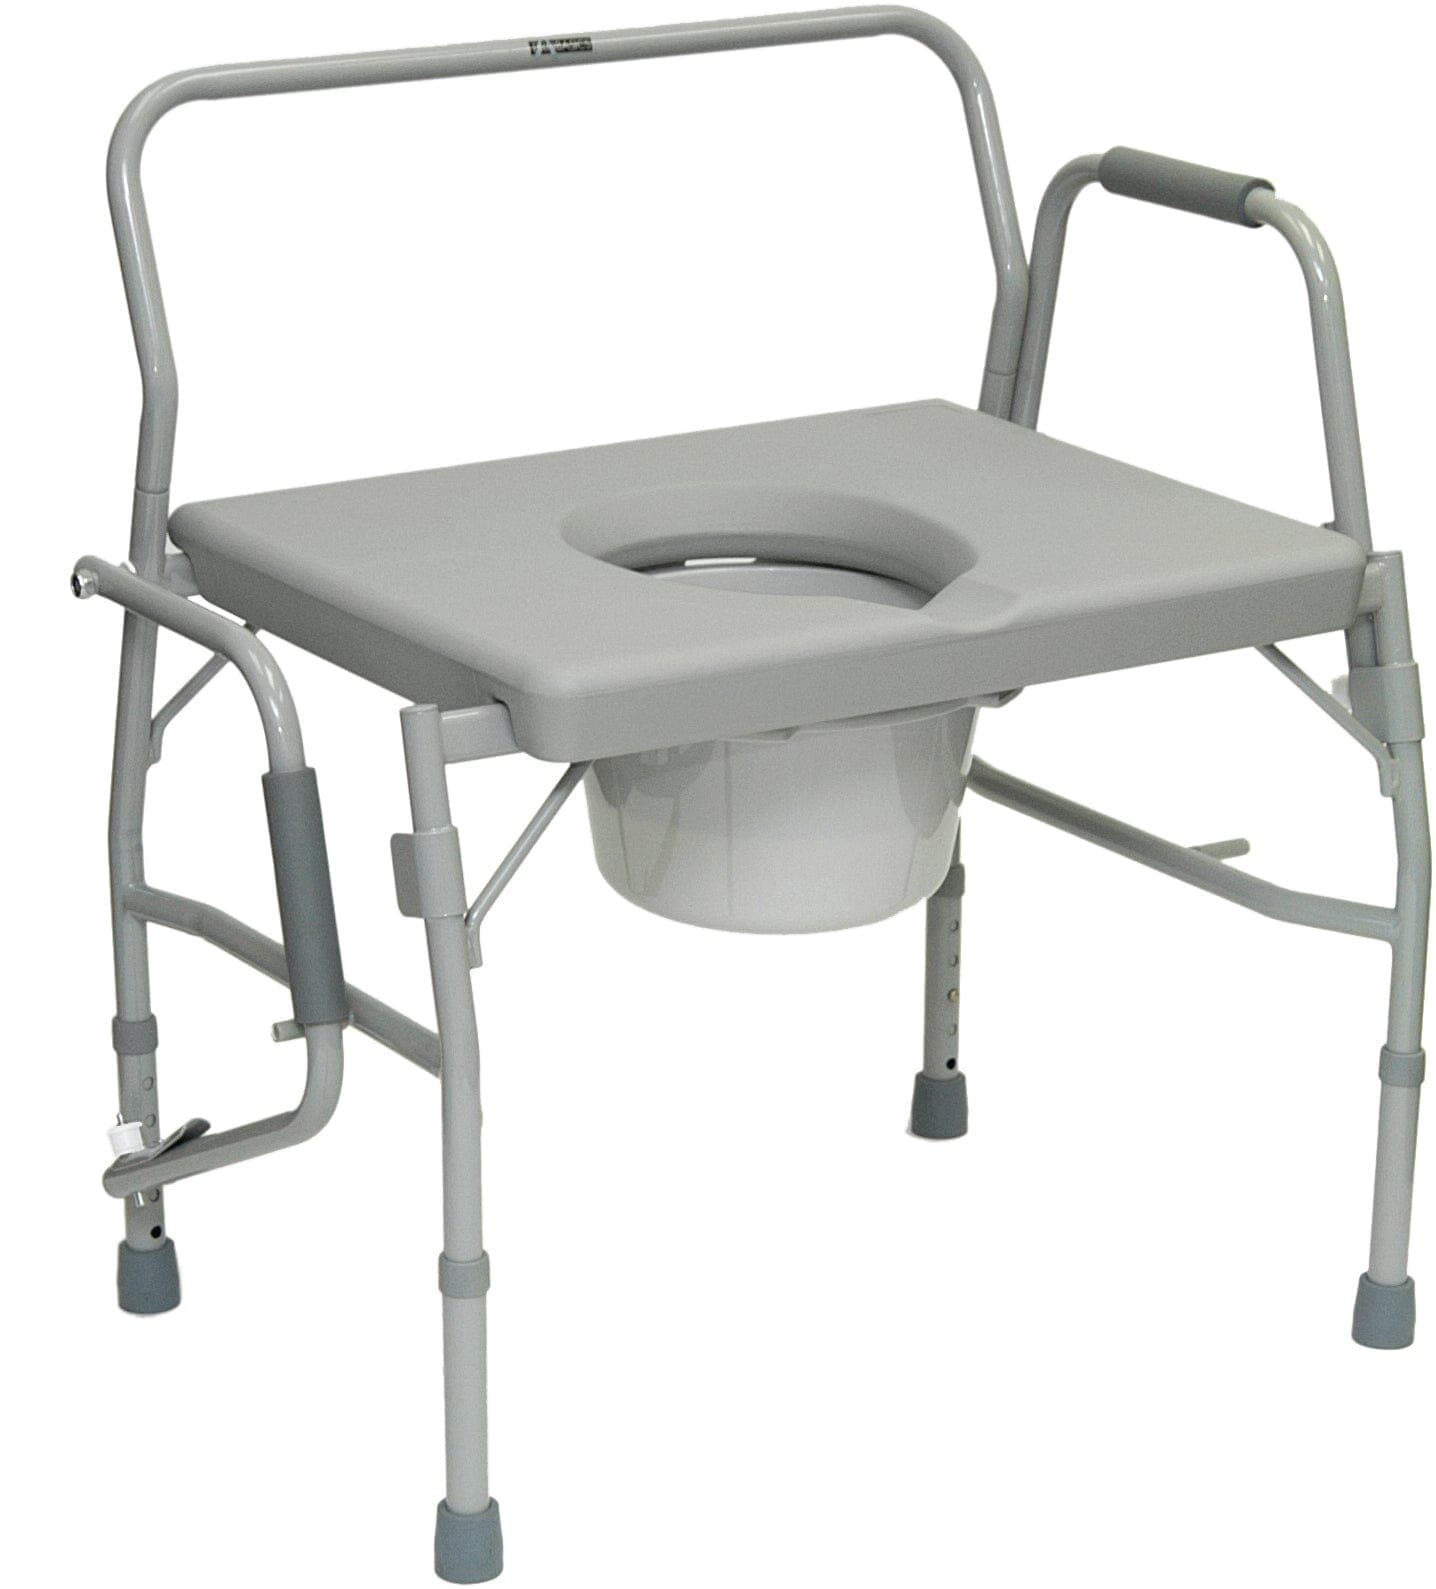 Compass Health Commodes Compass Health ProBasics Bariatric Drop-Arm Commode,